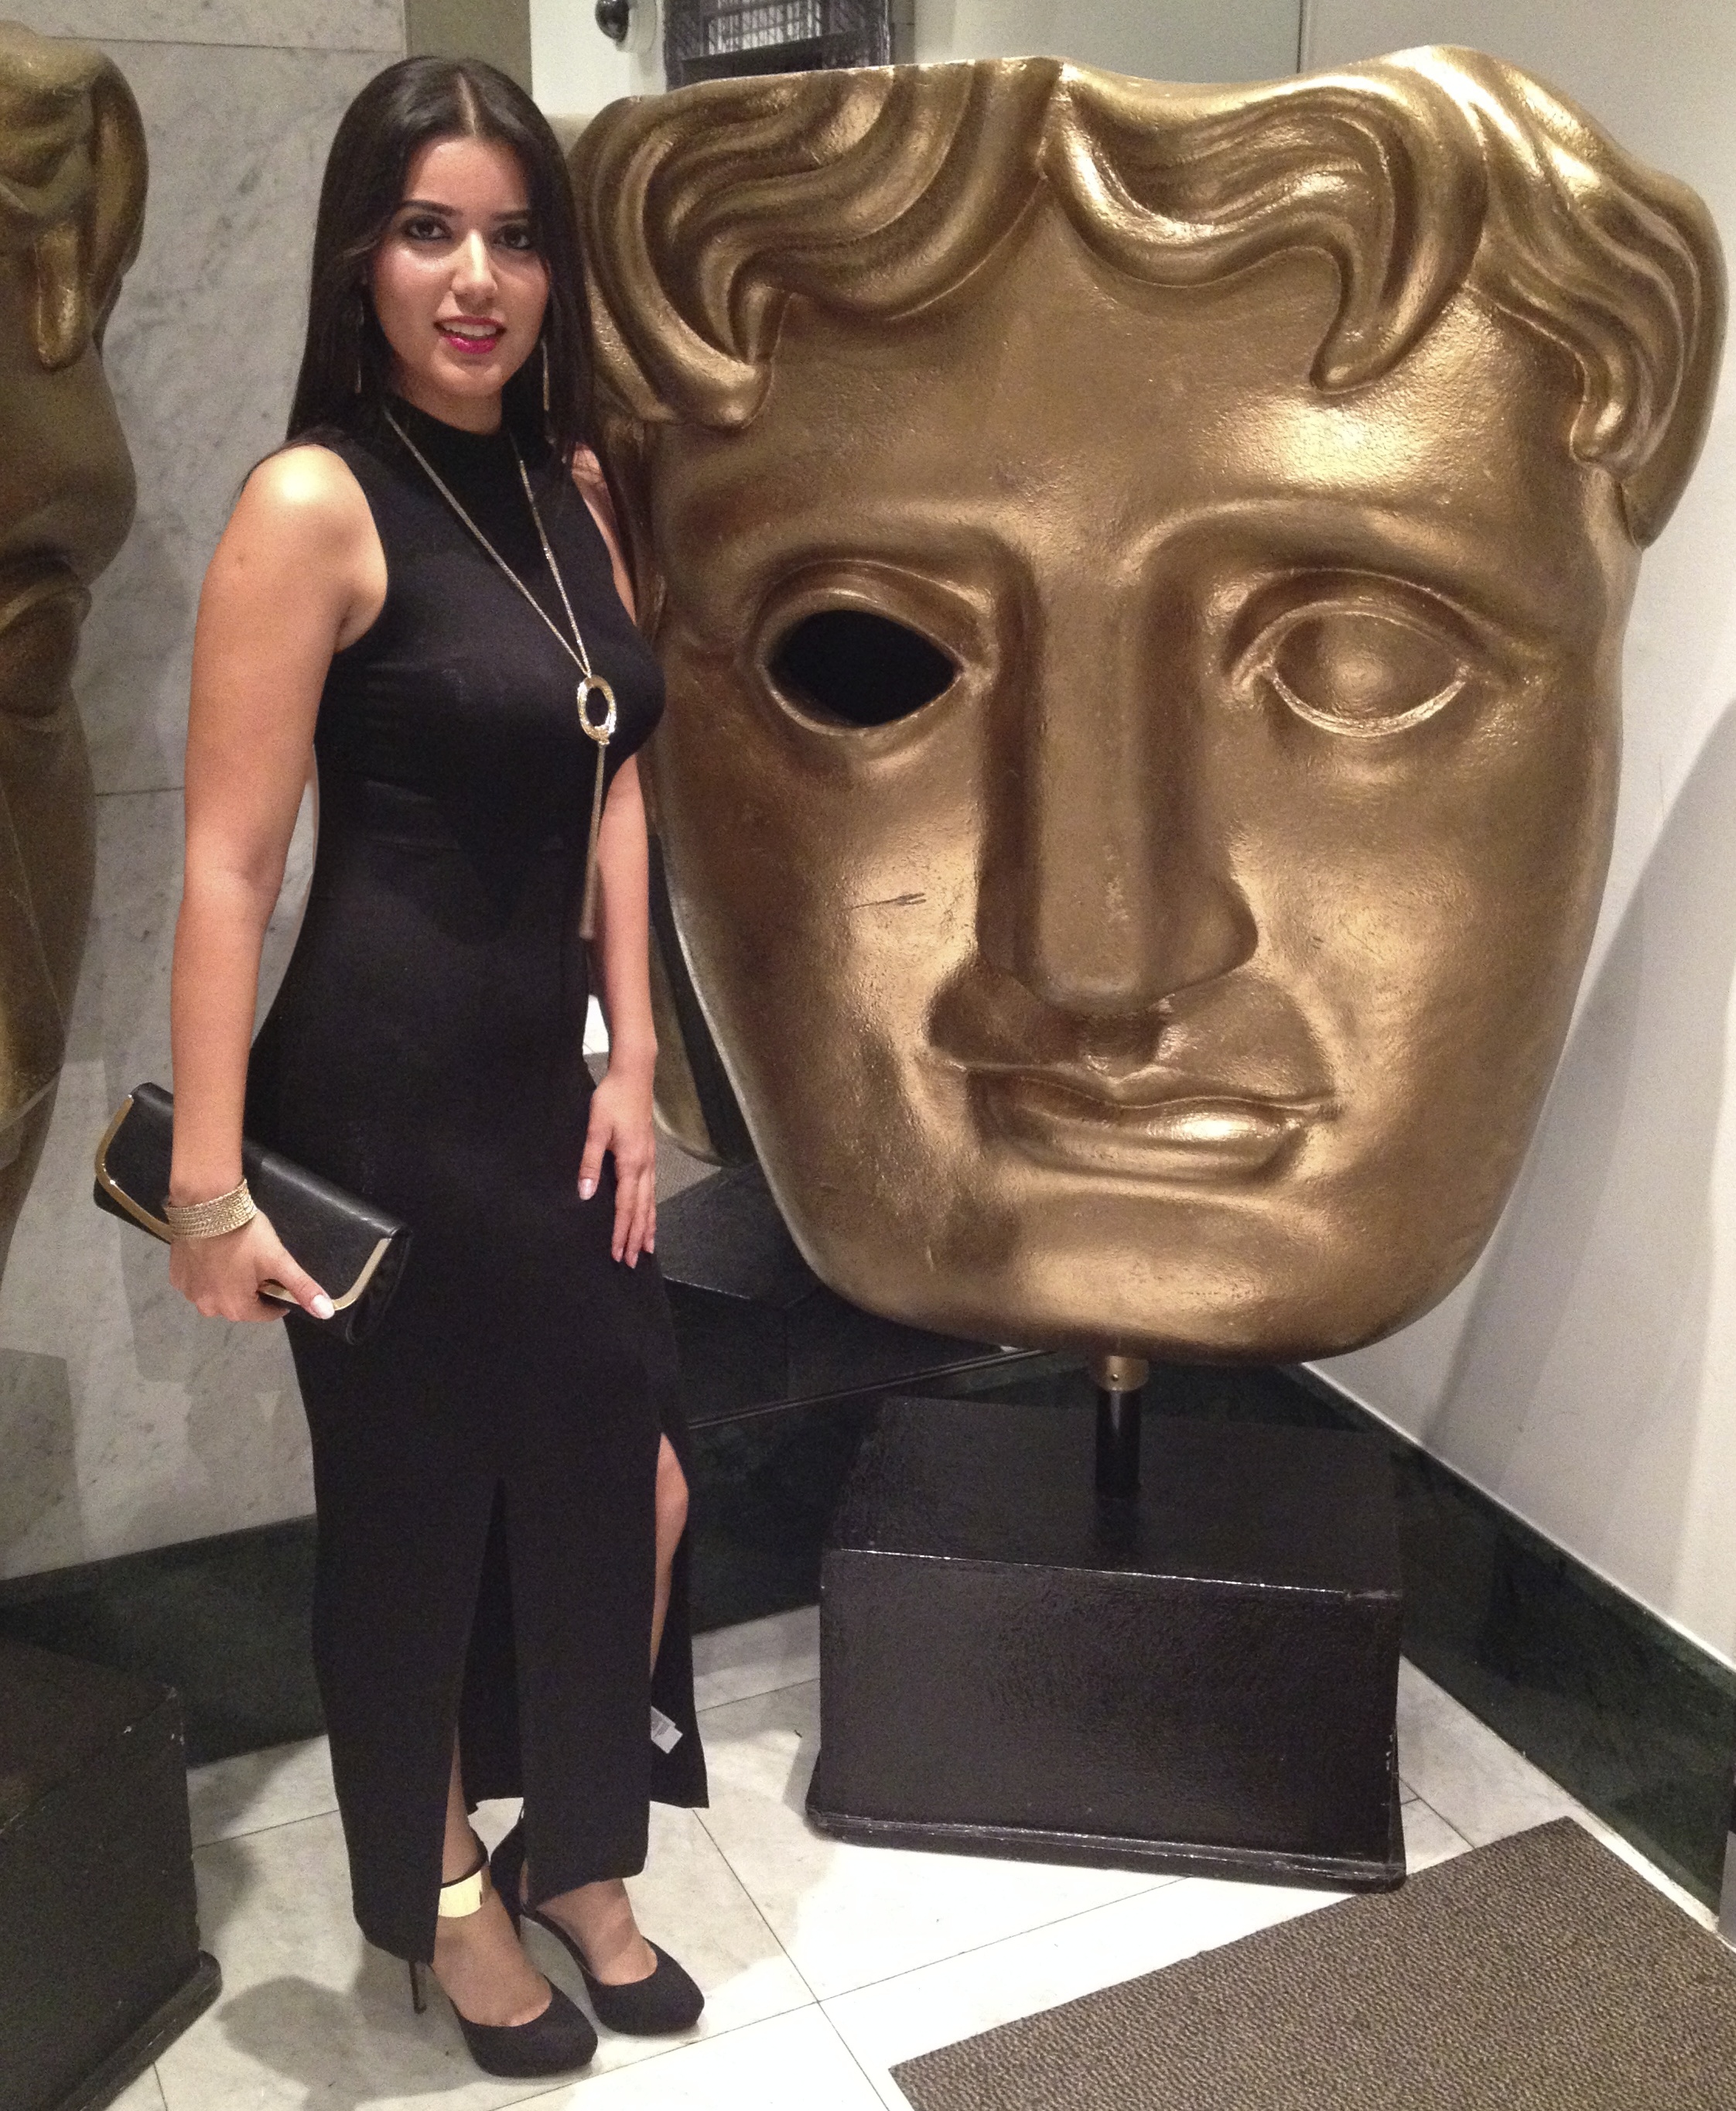 Christmas In A Day Premier at BAFTA